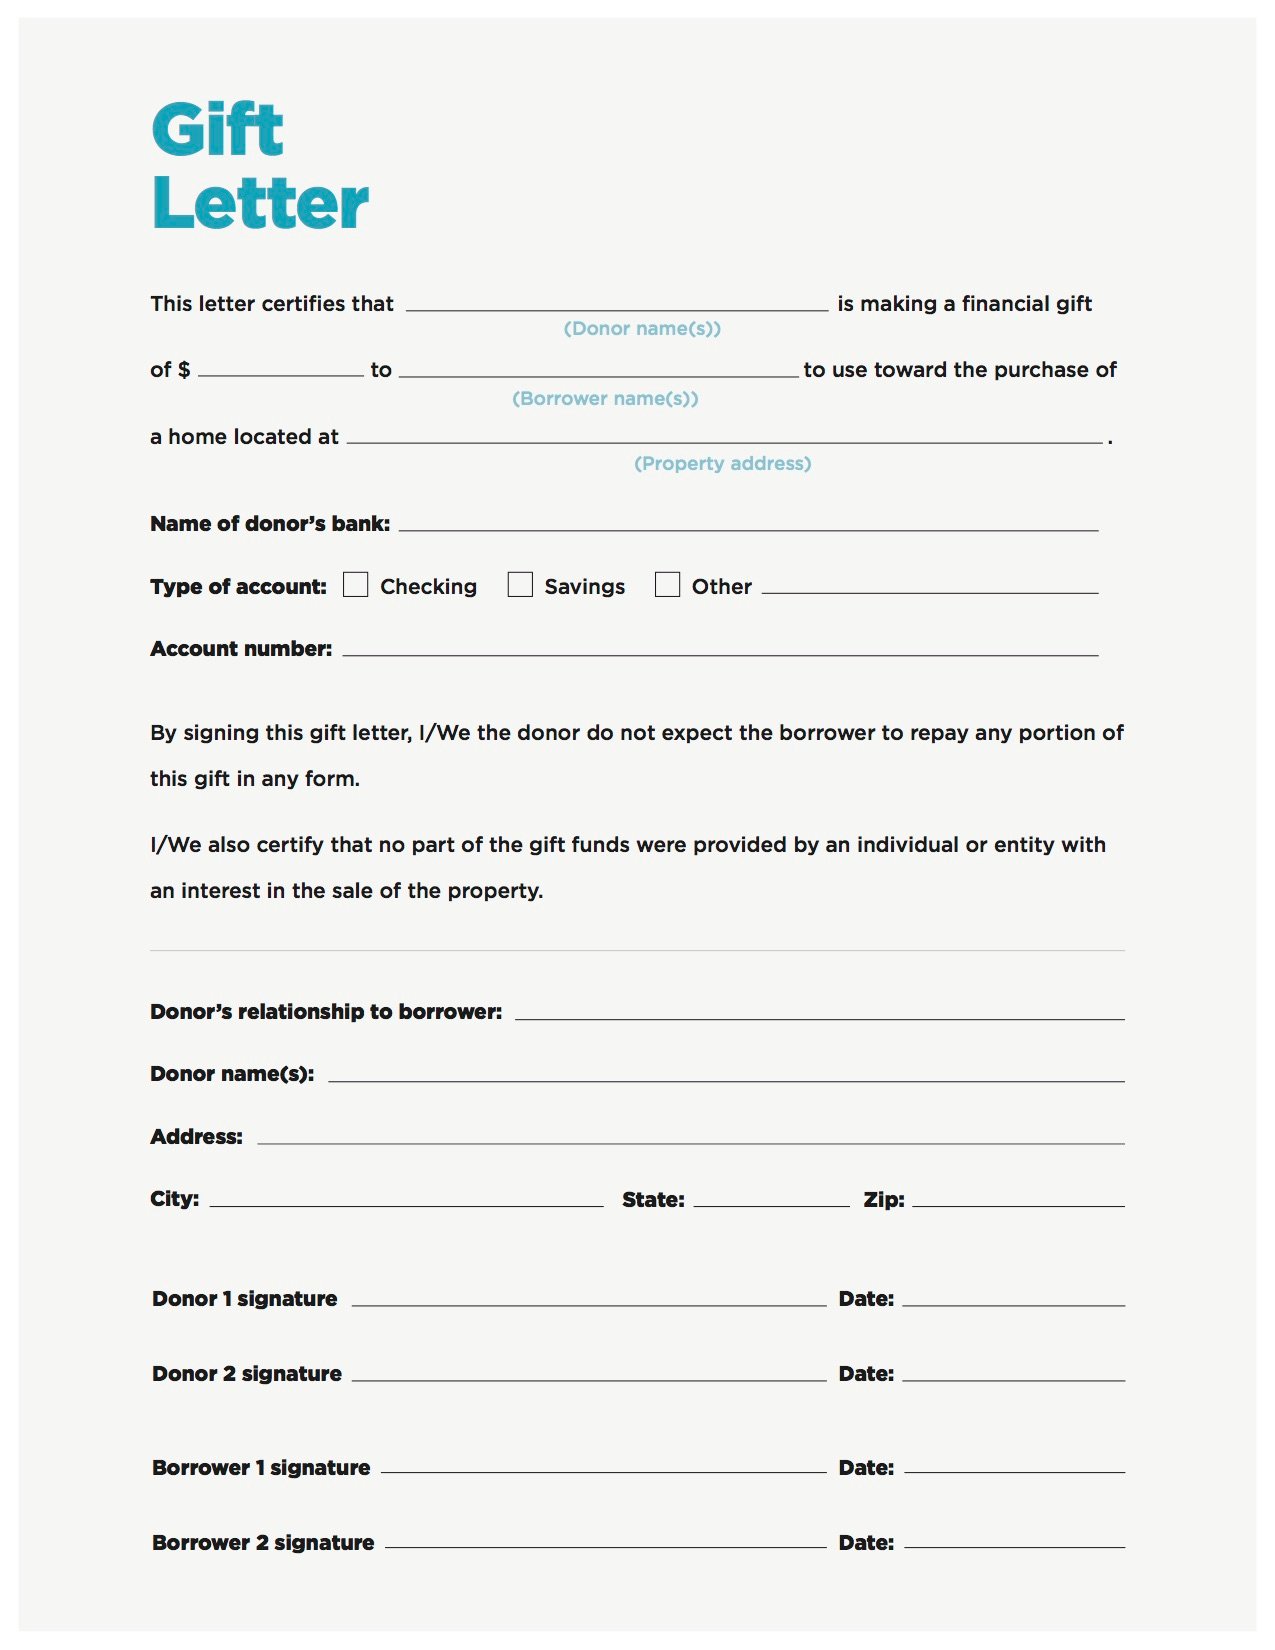 how to write a letter asking for a personal loan